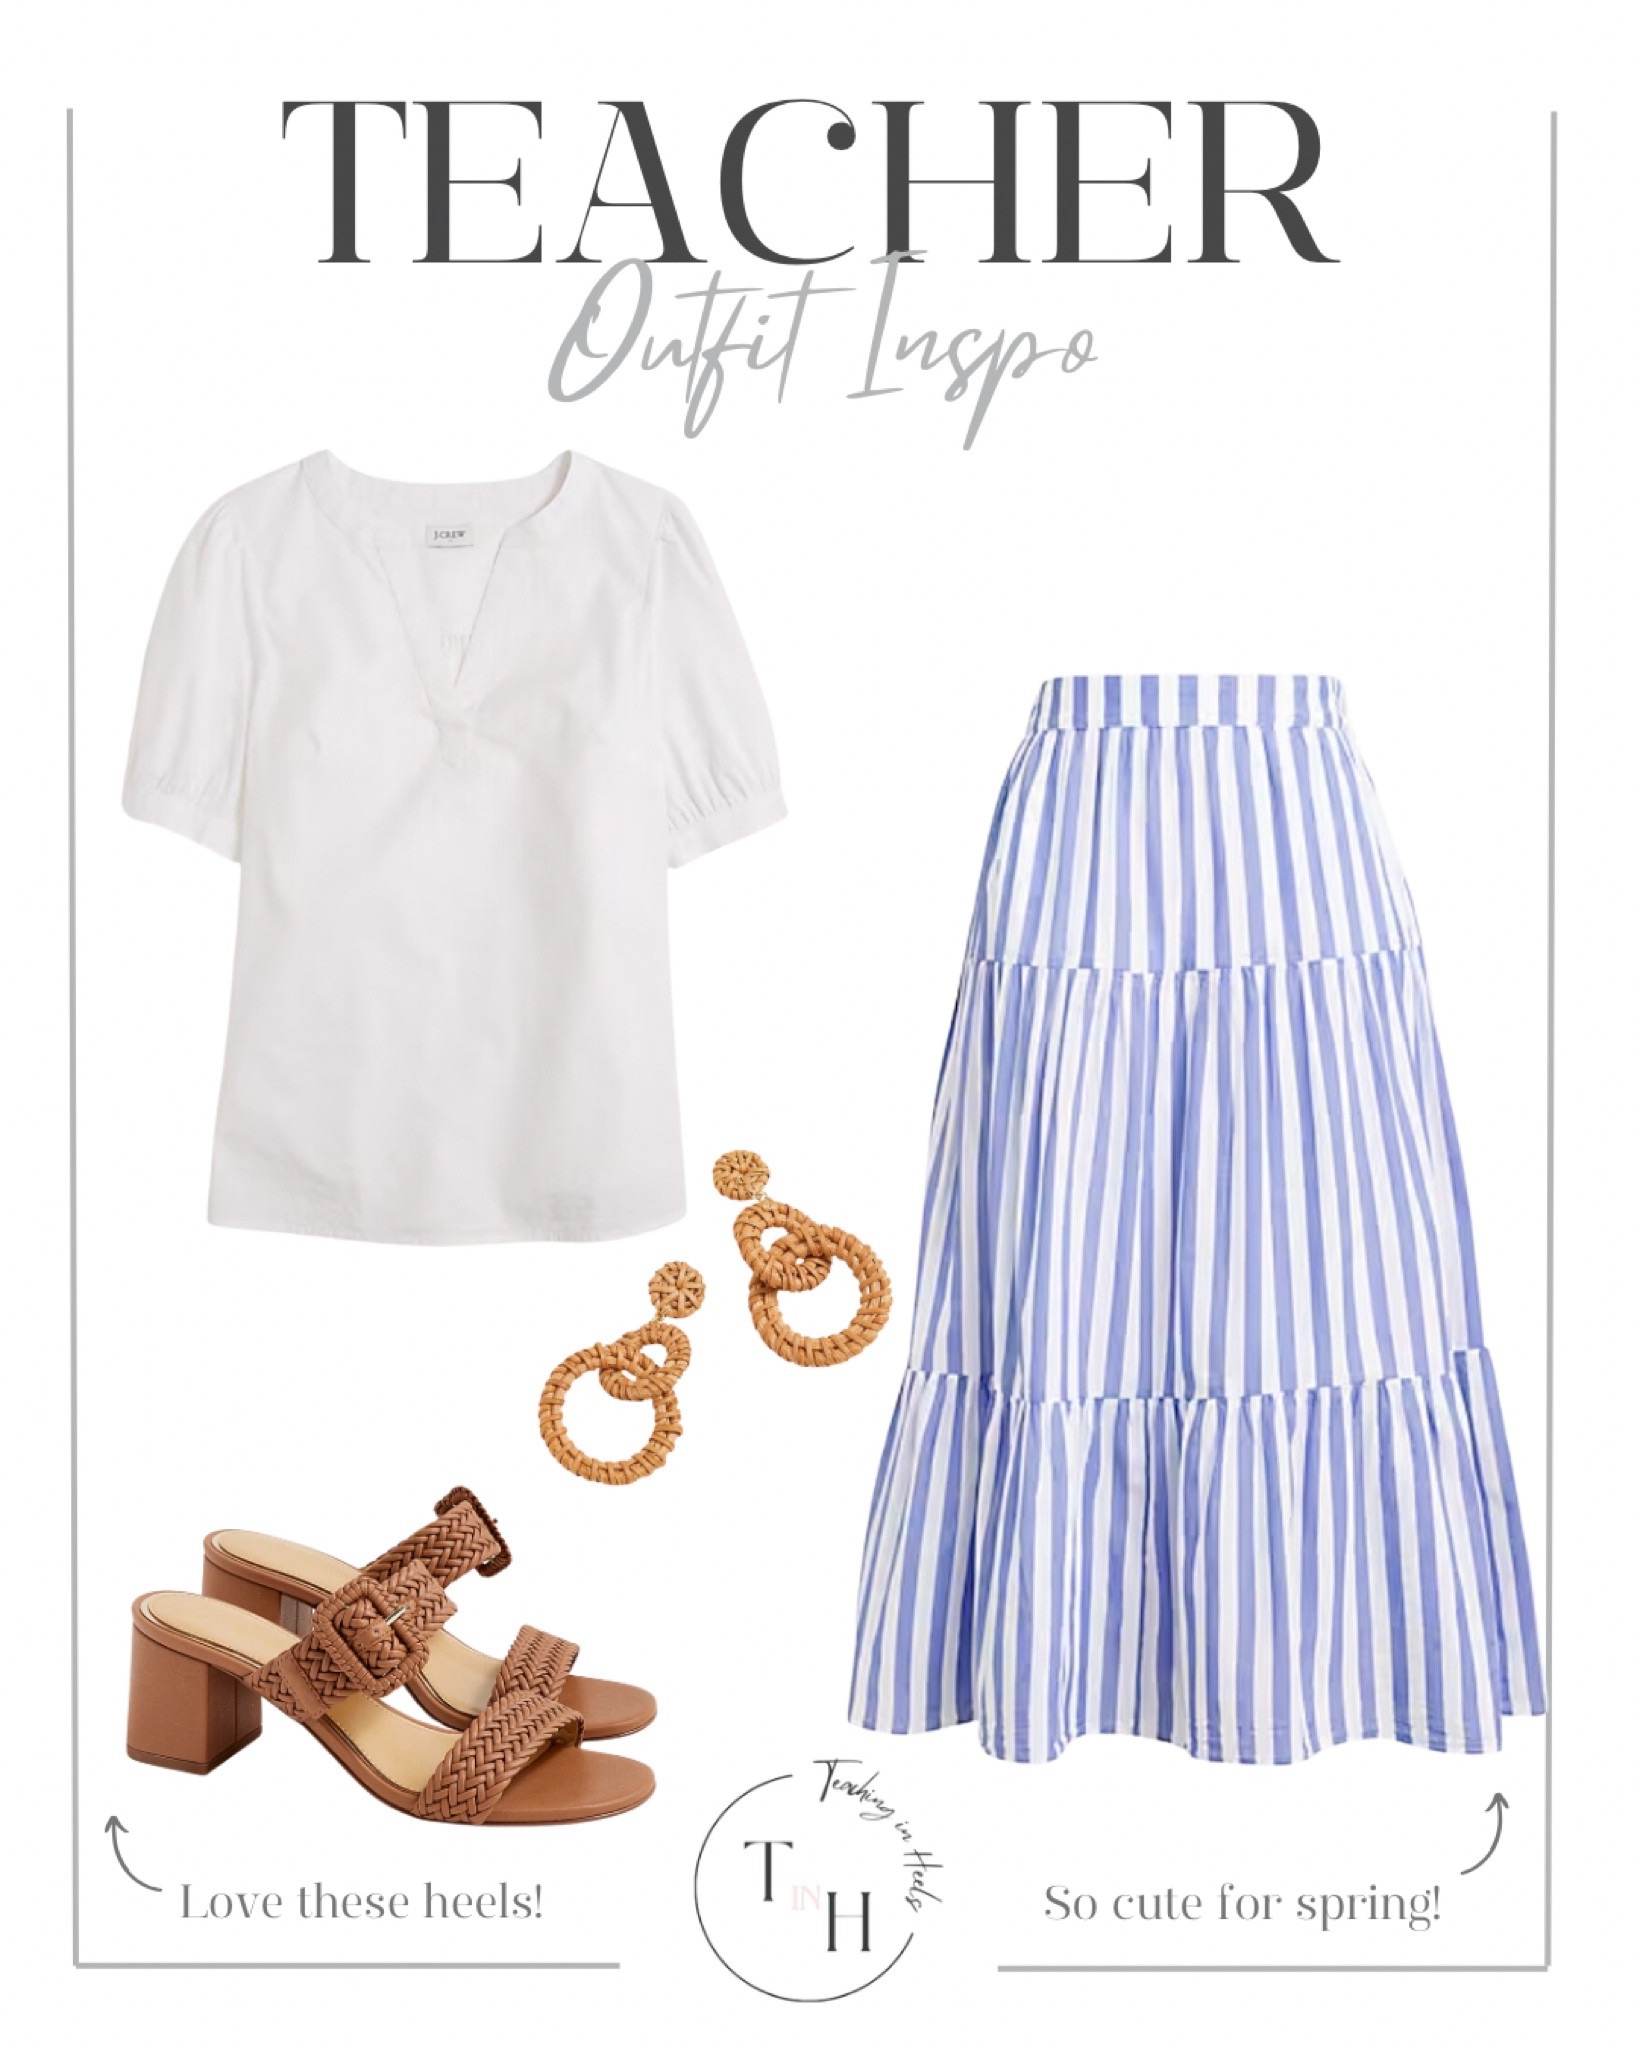 Chic & Comfortable: Spring Fashion for Teachers

spring, spring fashion, spring outfit, teacher outfit, workwear, work outfit, maxi skirt